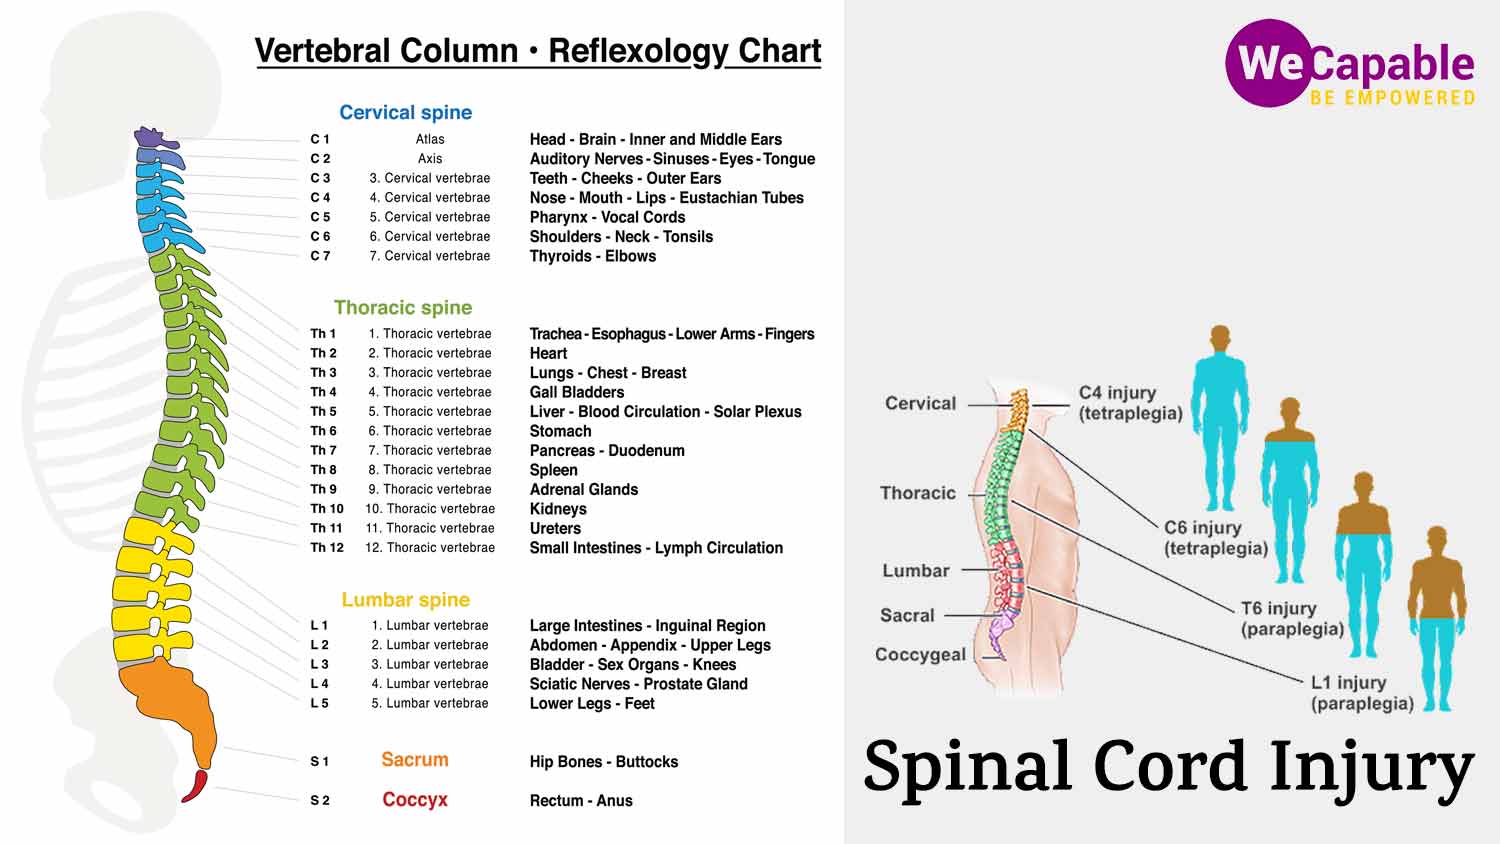 illustration showing reflexology chart of spinal cord and the parts of body affected by spinal cord injury